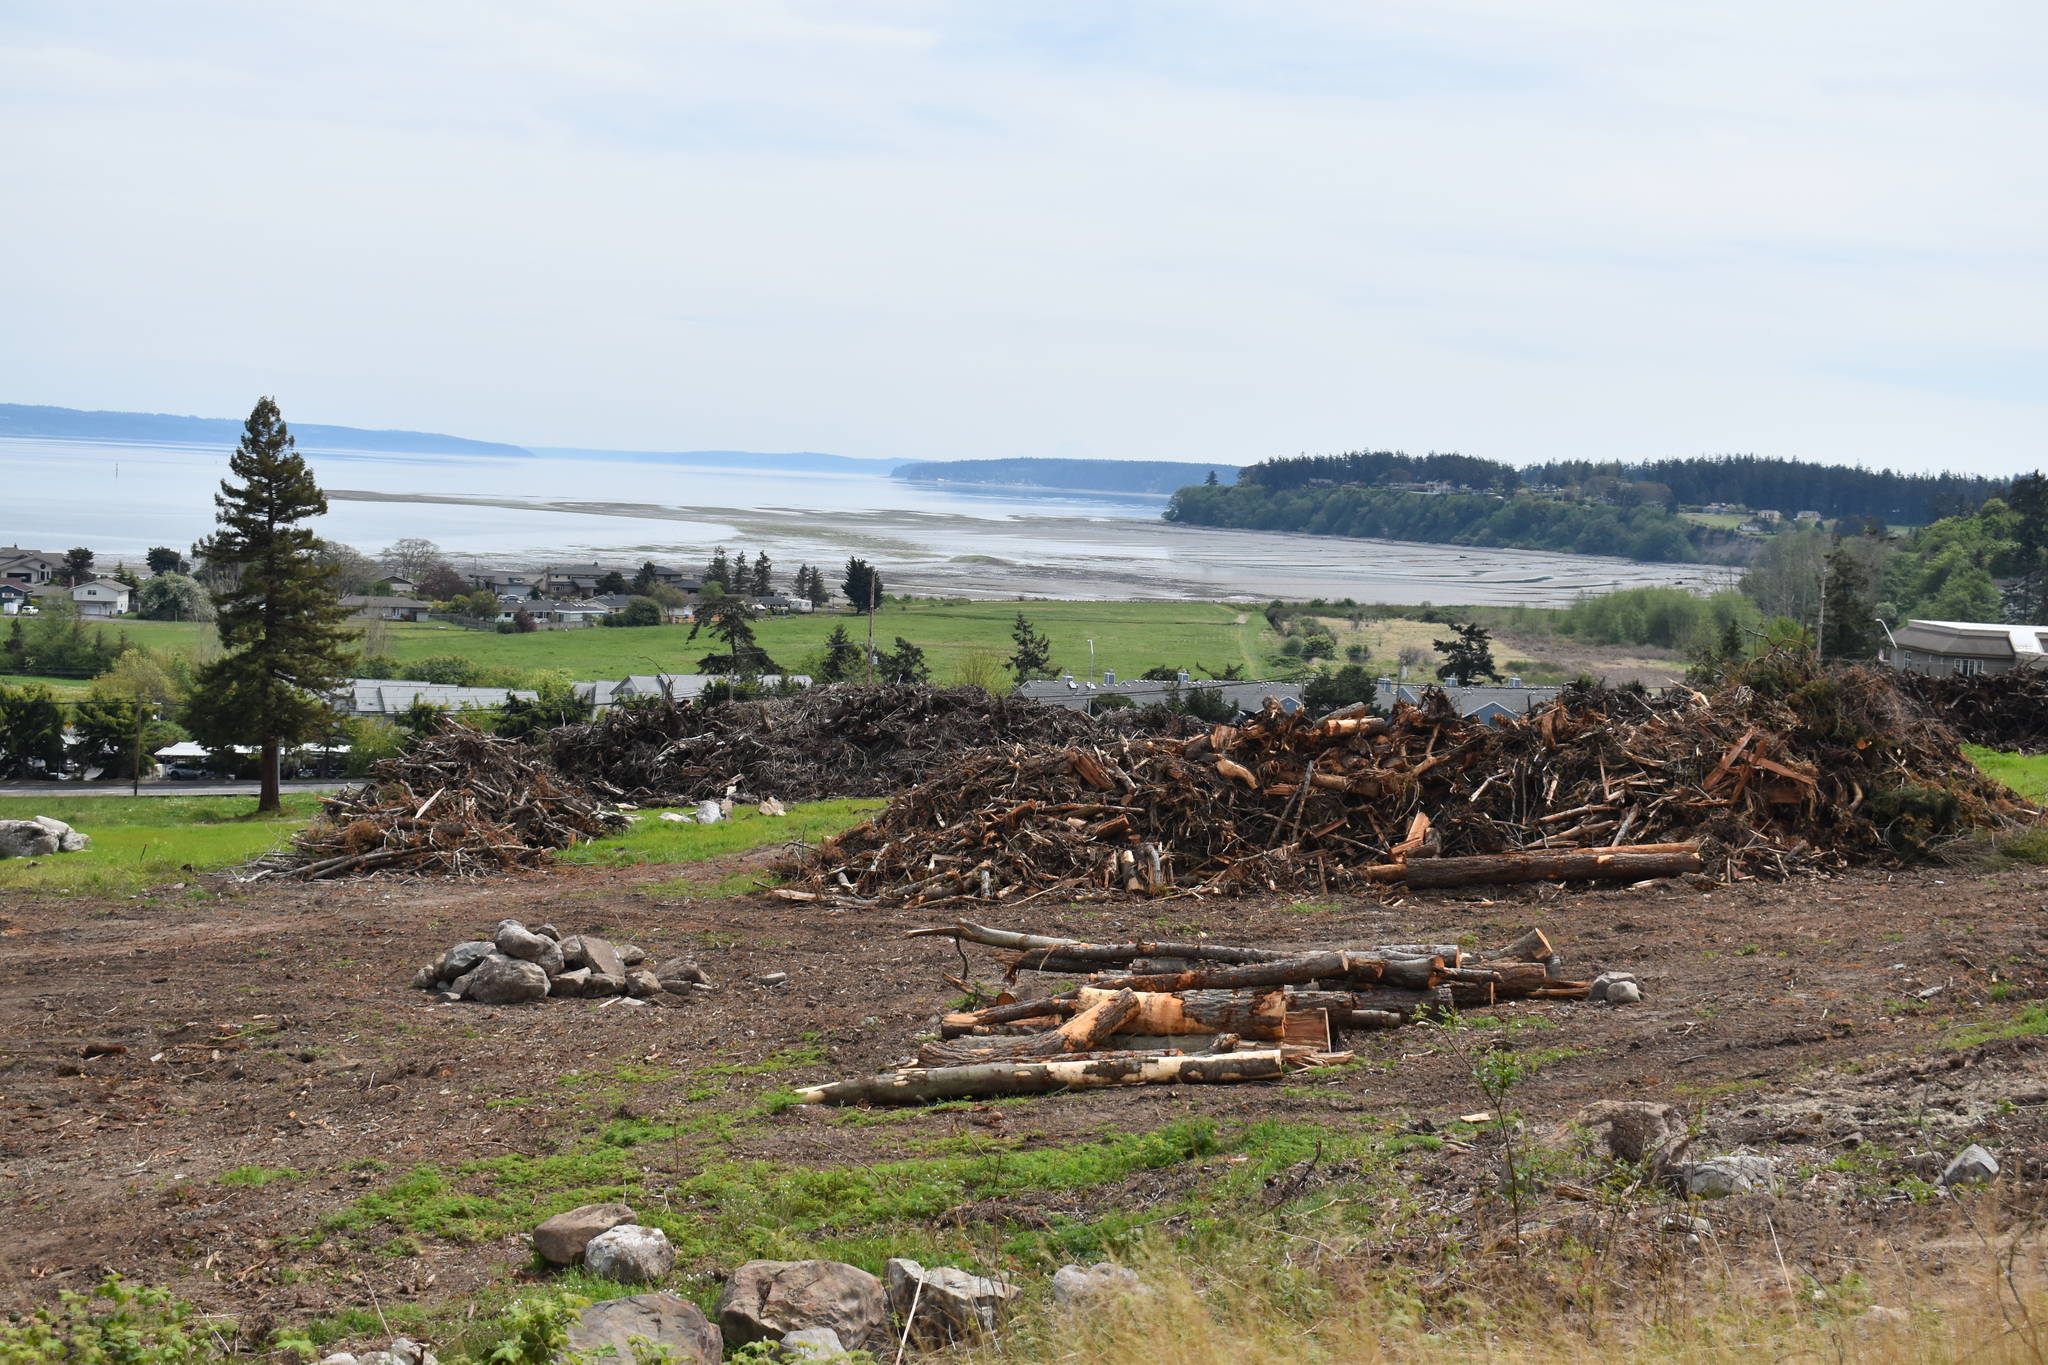 After a delay caused by the pandemic, developer Scott Thompson said construction of new homes may begin soon on the hillside across from Safeway. Photo by Emily Gilbert/Whidbey News-Times